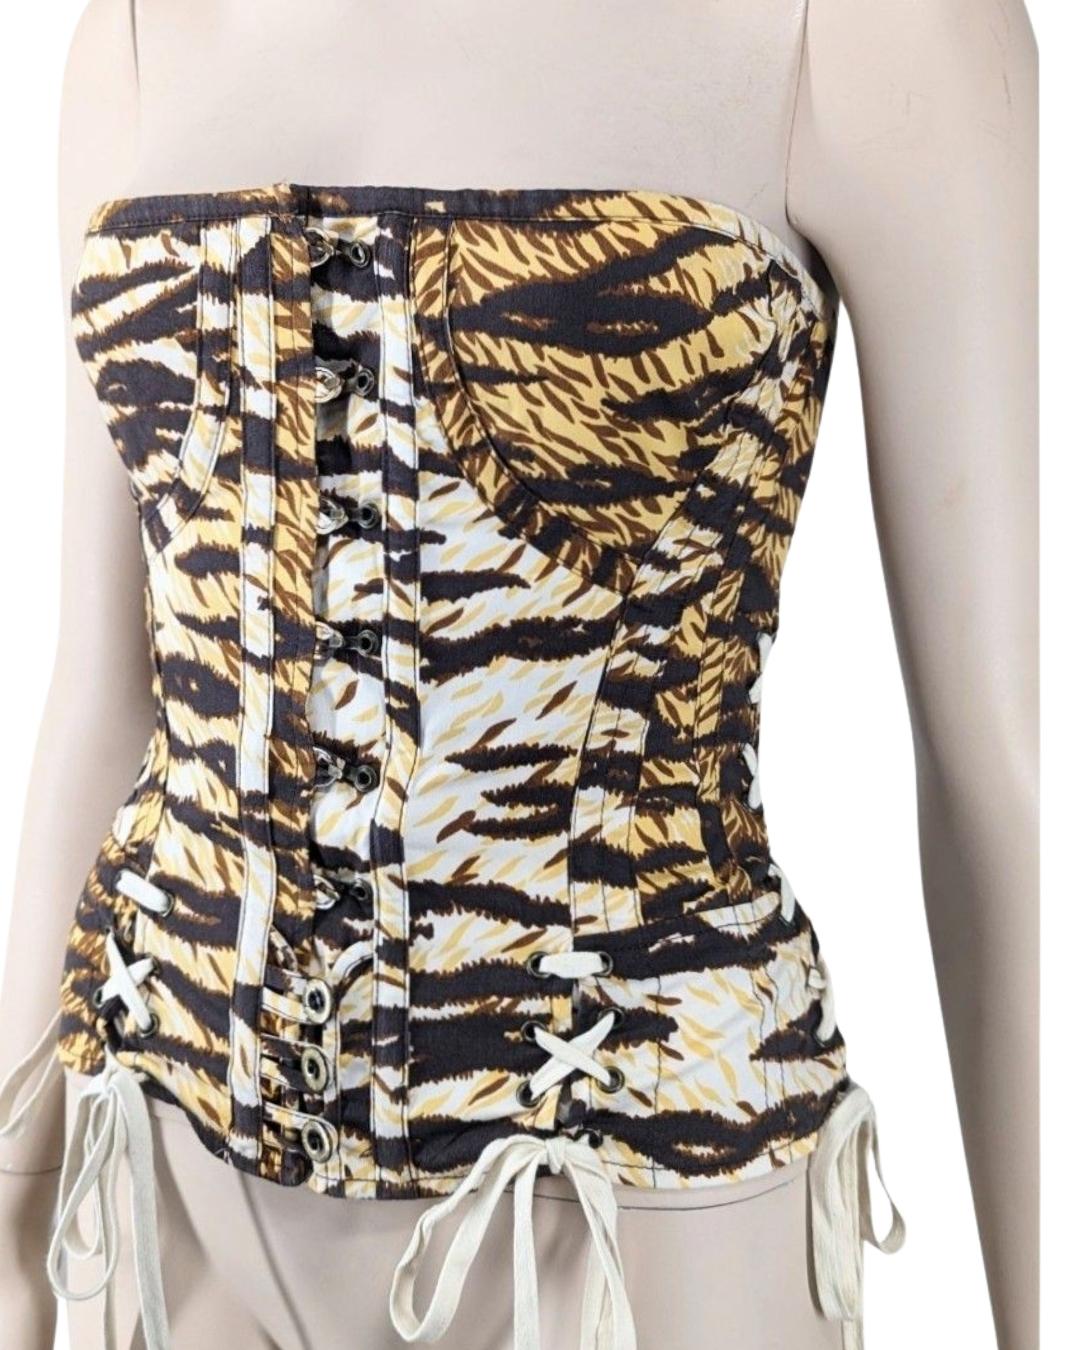 D&G by Dolce & Gabbana Animal Print Bustier For Sale 5